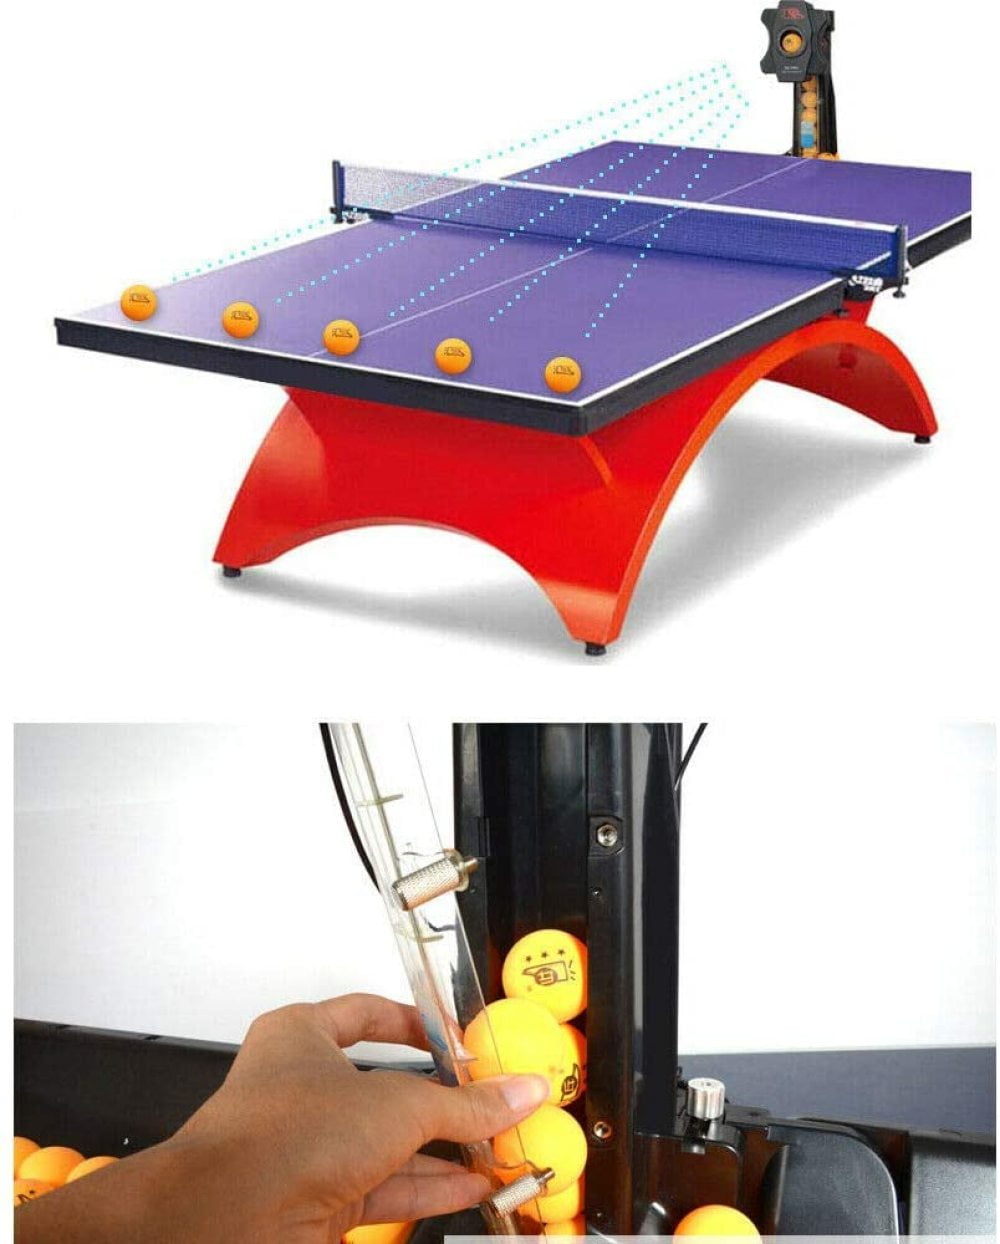 50W Table Tennis Robot Automatic Ping-pong Ball Machine Practice w/ Recycle Net